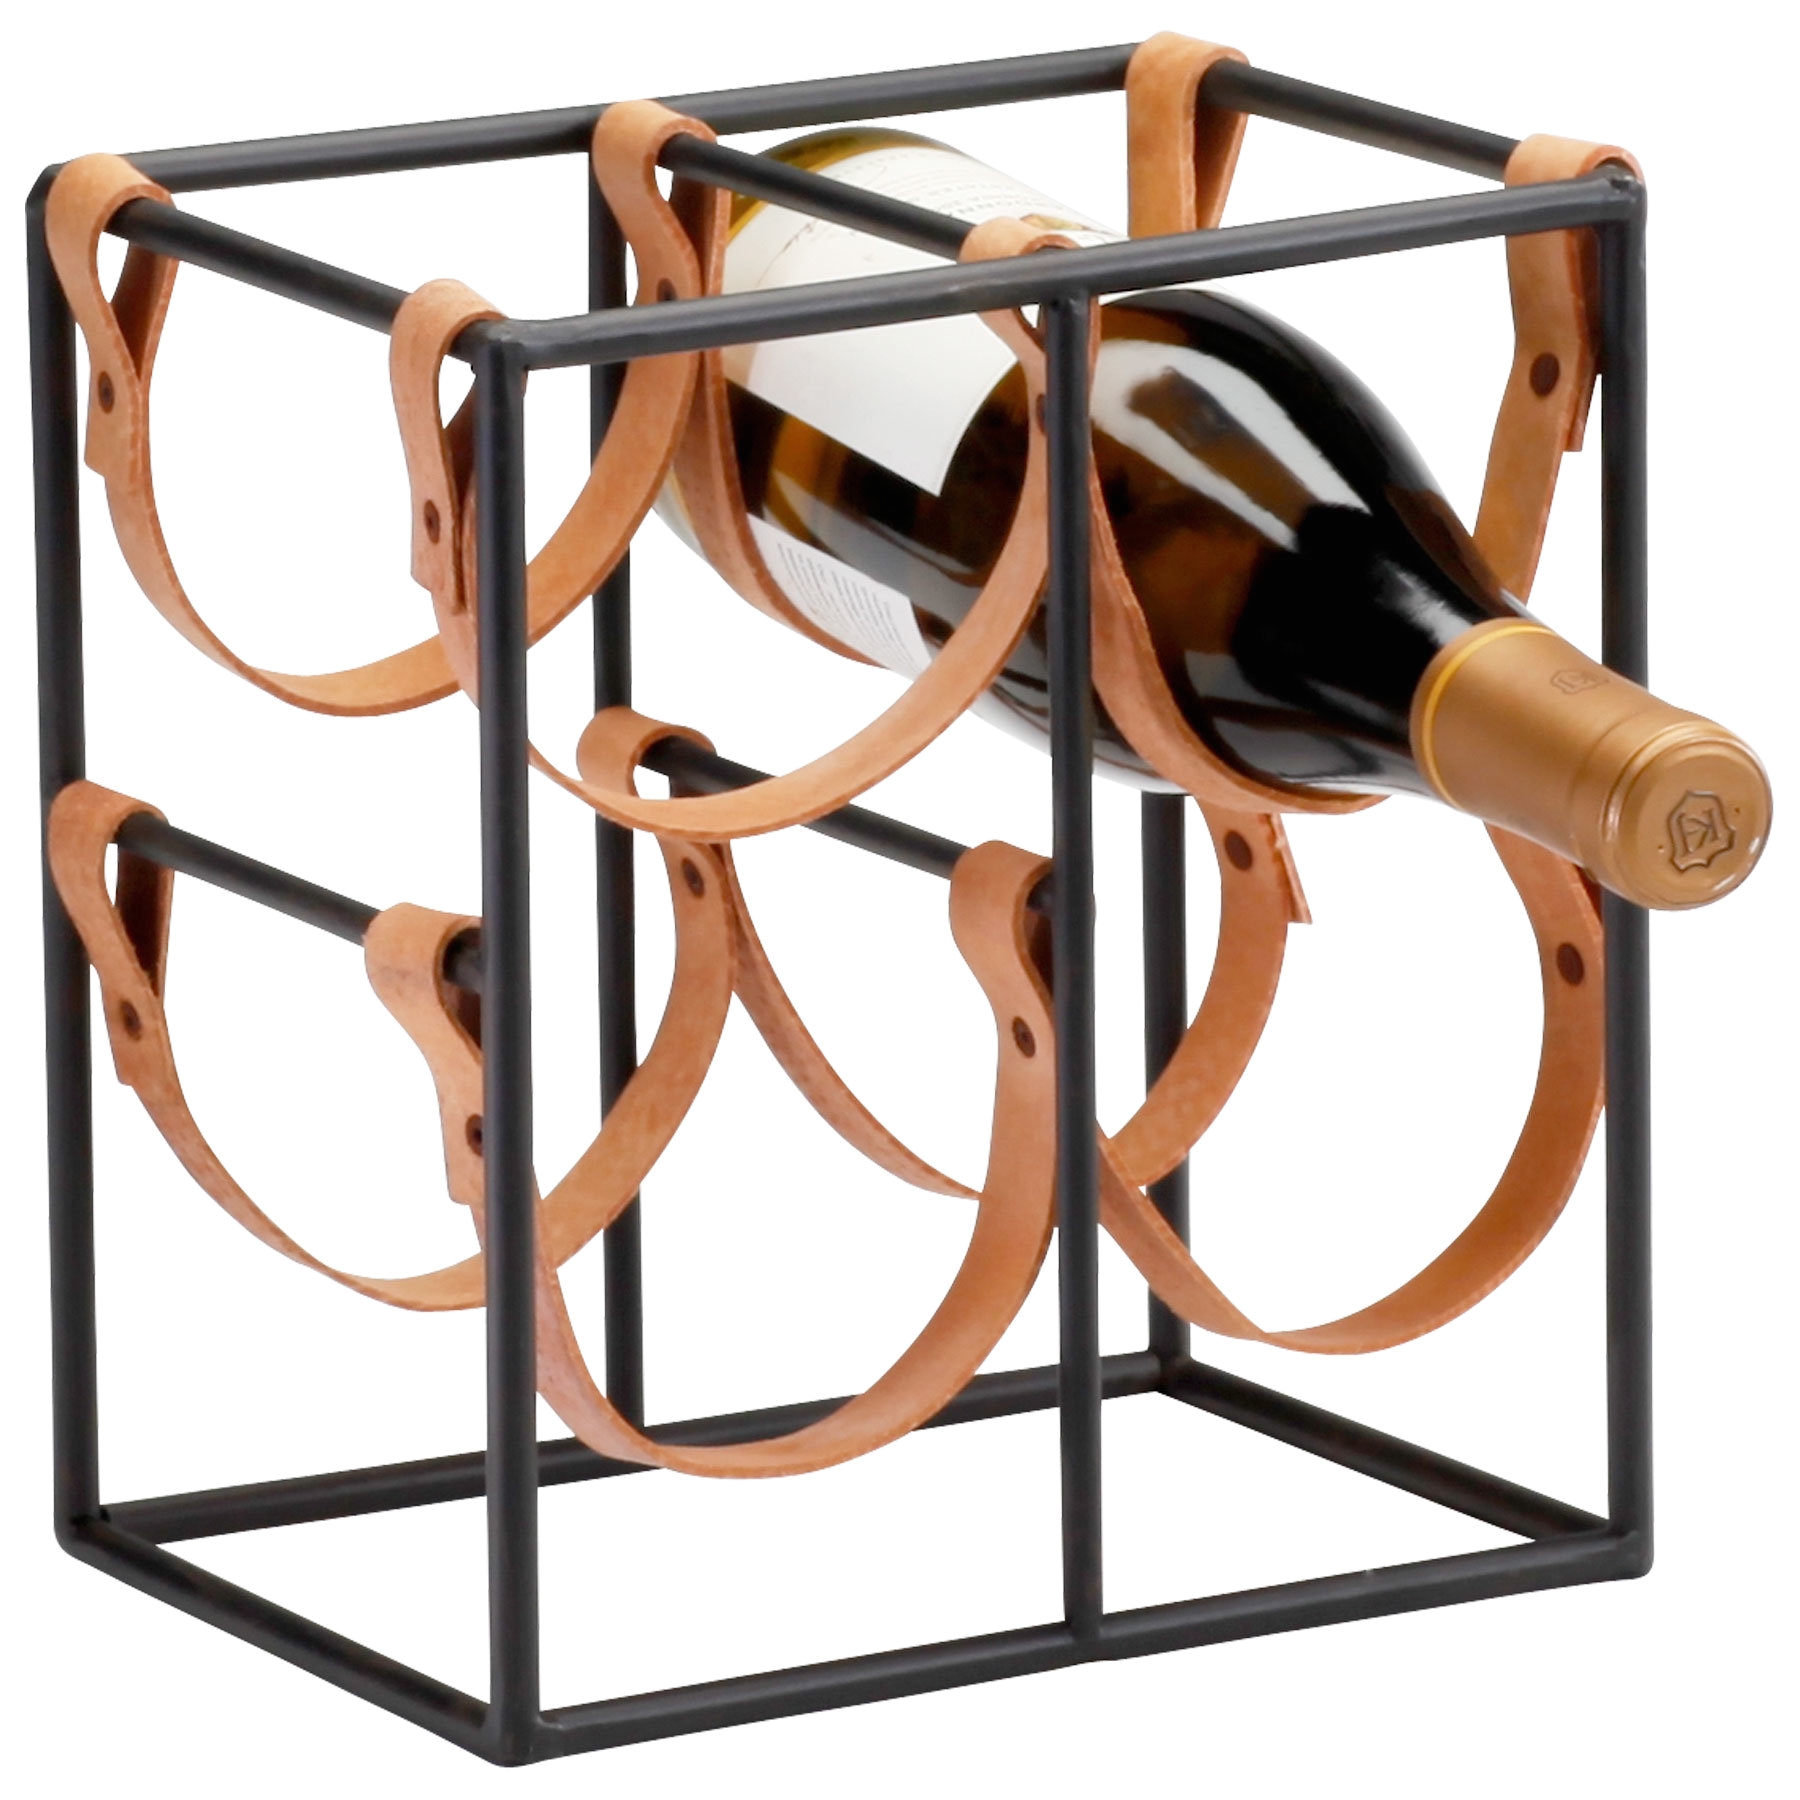 Raymour and Flanigan Electric Fireplaces Best Of Small Black Metal Wine Rack Cyan Design Small Brighton 4